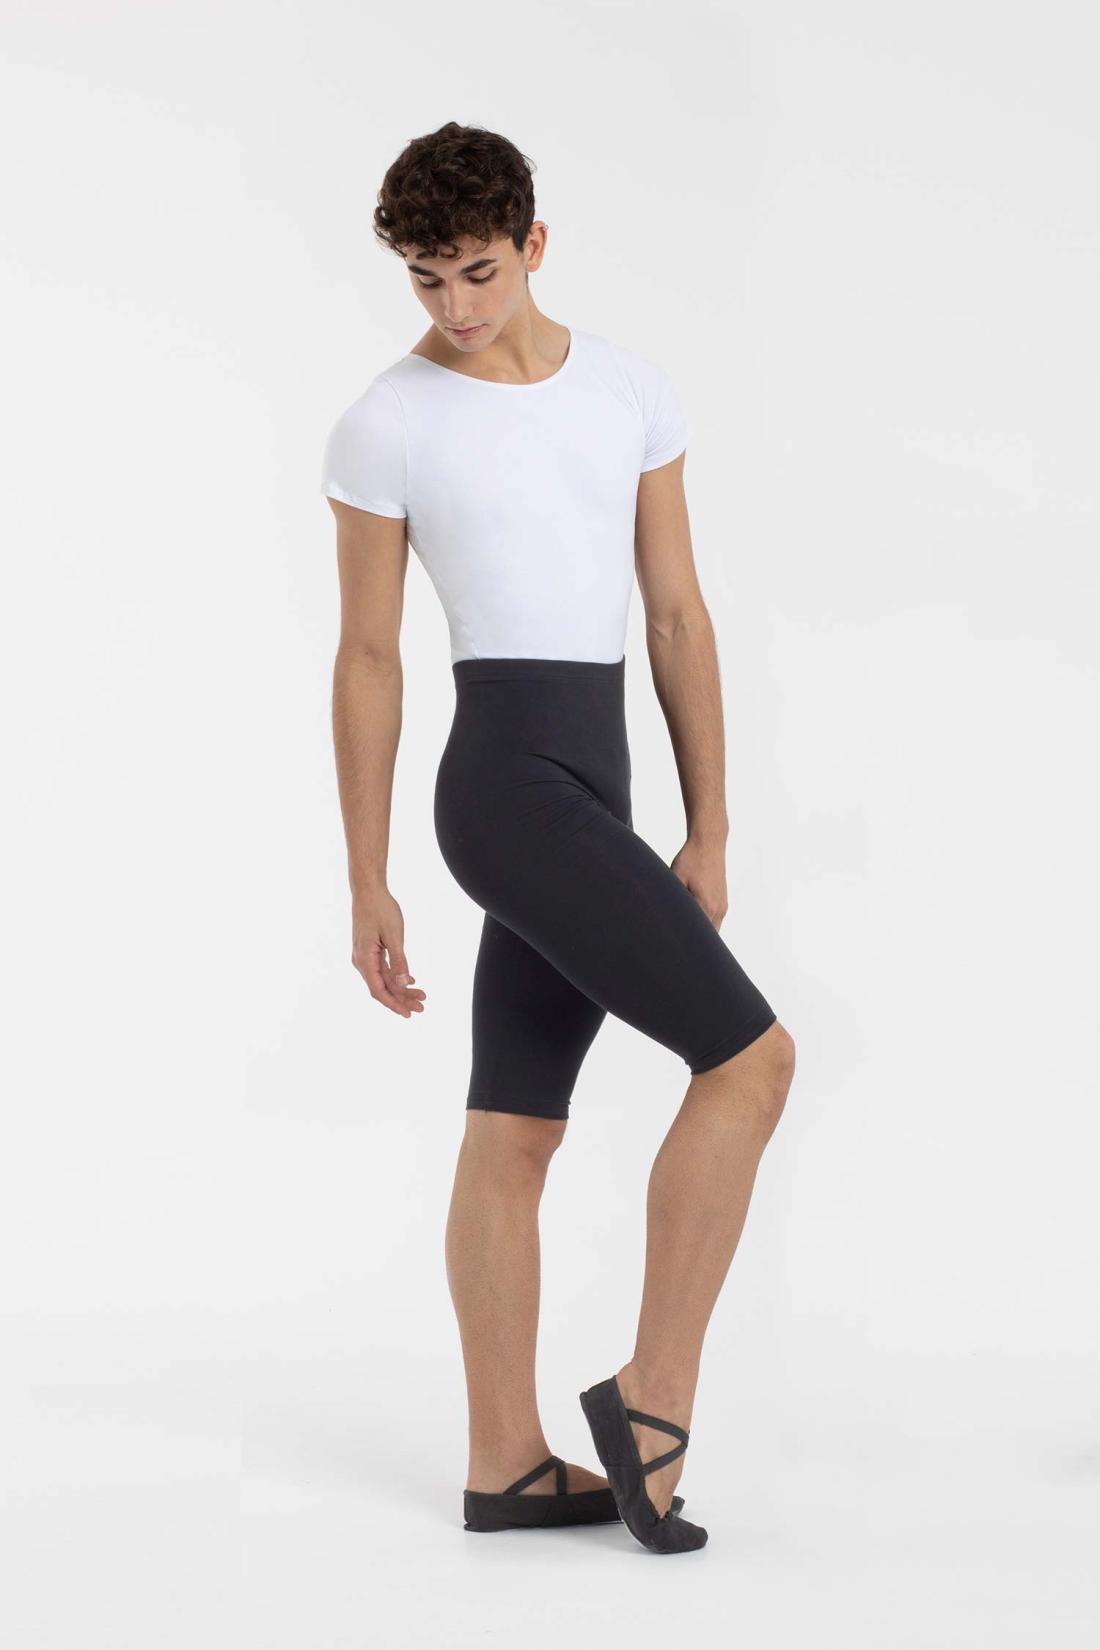 Over-the-knee Pants for Male Dancers in Organic Cotton Intermezzo Ballet Dance